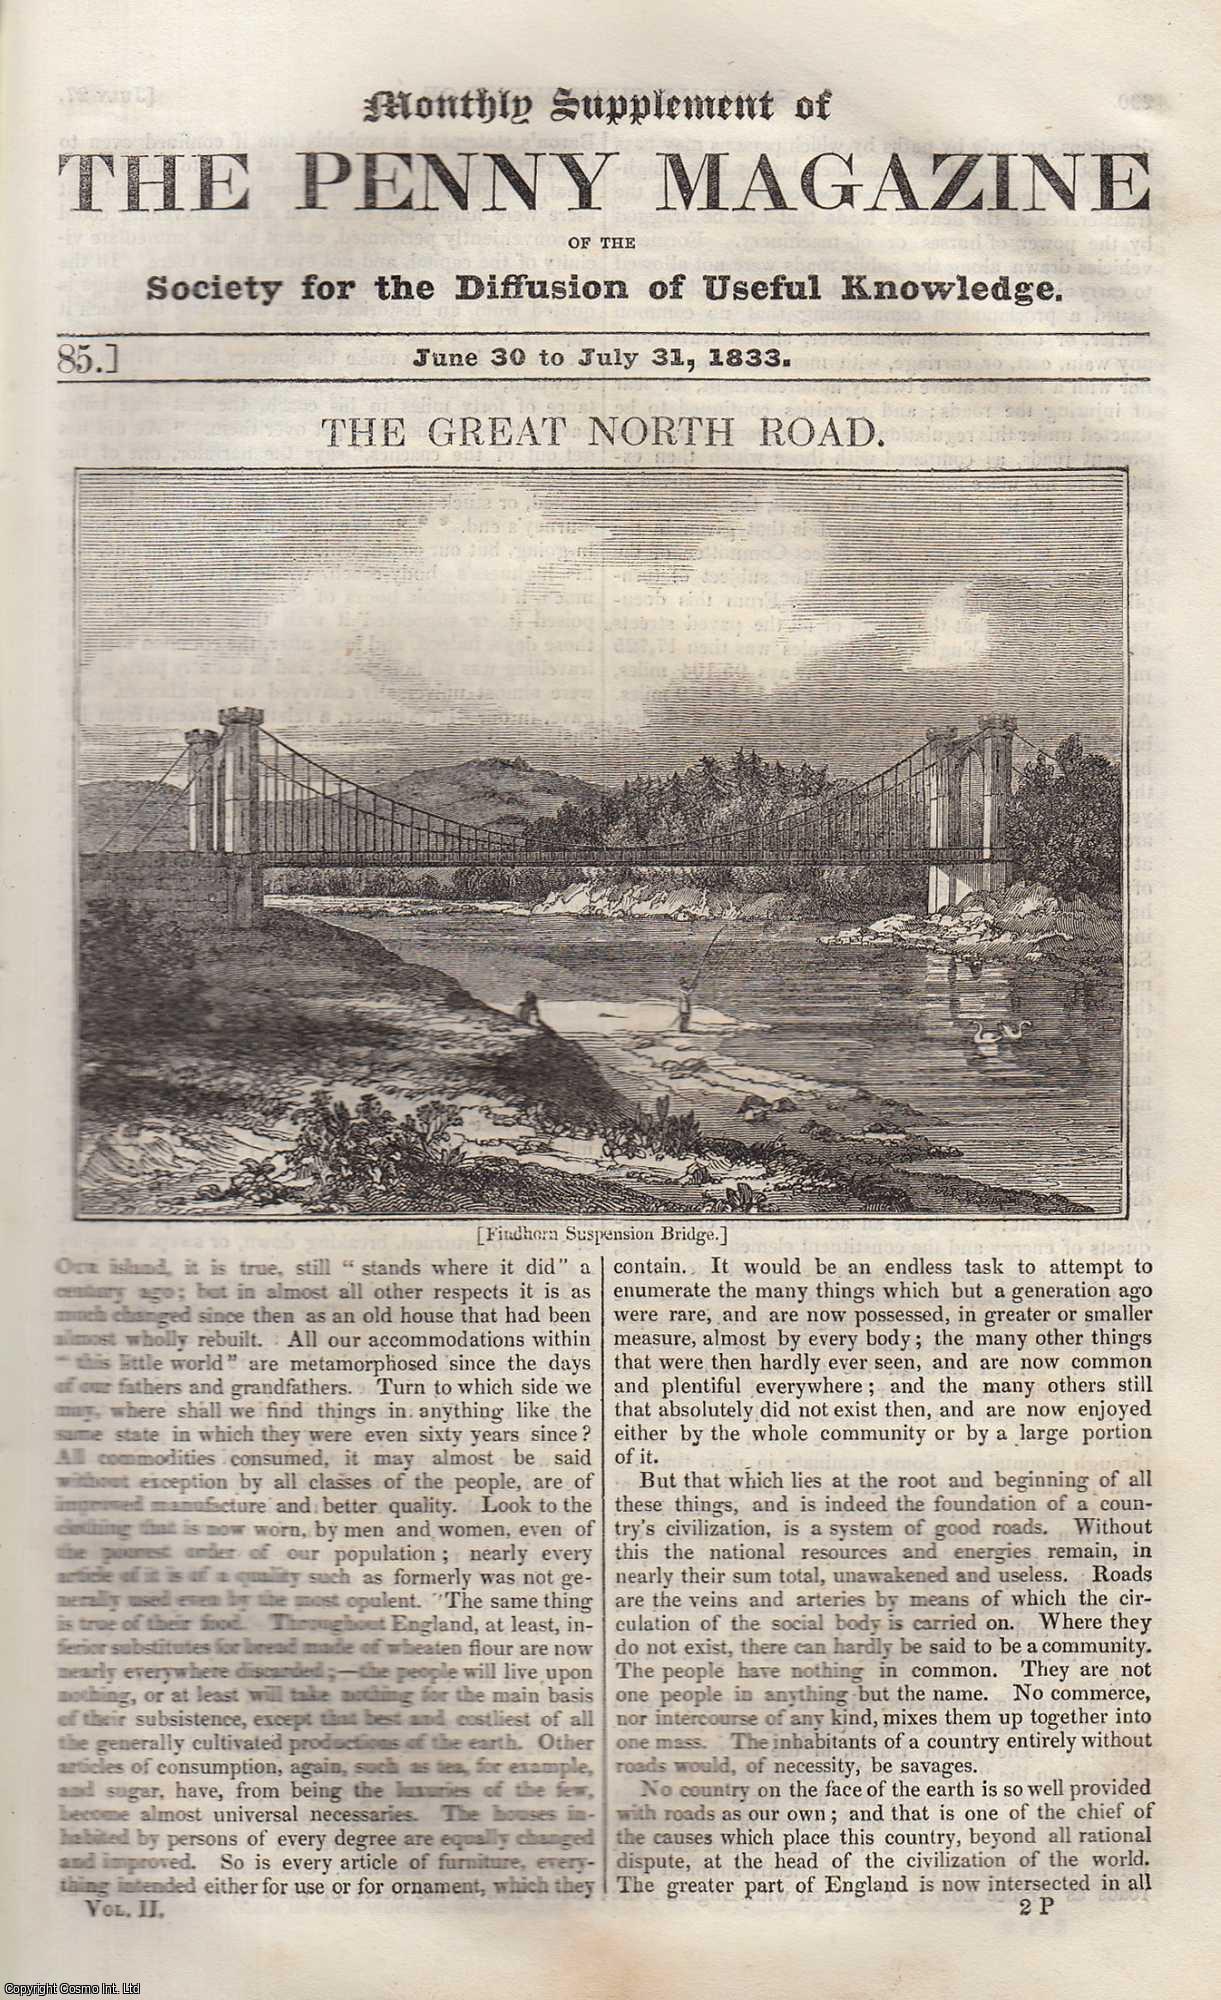 --- - Findhorn Suspension Bridge; Dean Bridge, Edinburgh; Bridge over The Don & Dee at Aberdeen; Bridge over The South Esk at Montrose & Elgin Gas Works and Bishopmill Bridge, over The Lossie: The Great North Road. Issue No. 85, June 30th to July 31st, 1833. A complete rare weekly issue of the Penny Magazine, 1833.